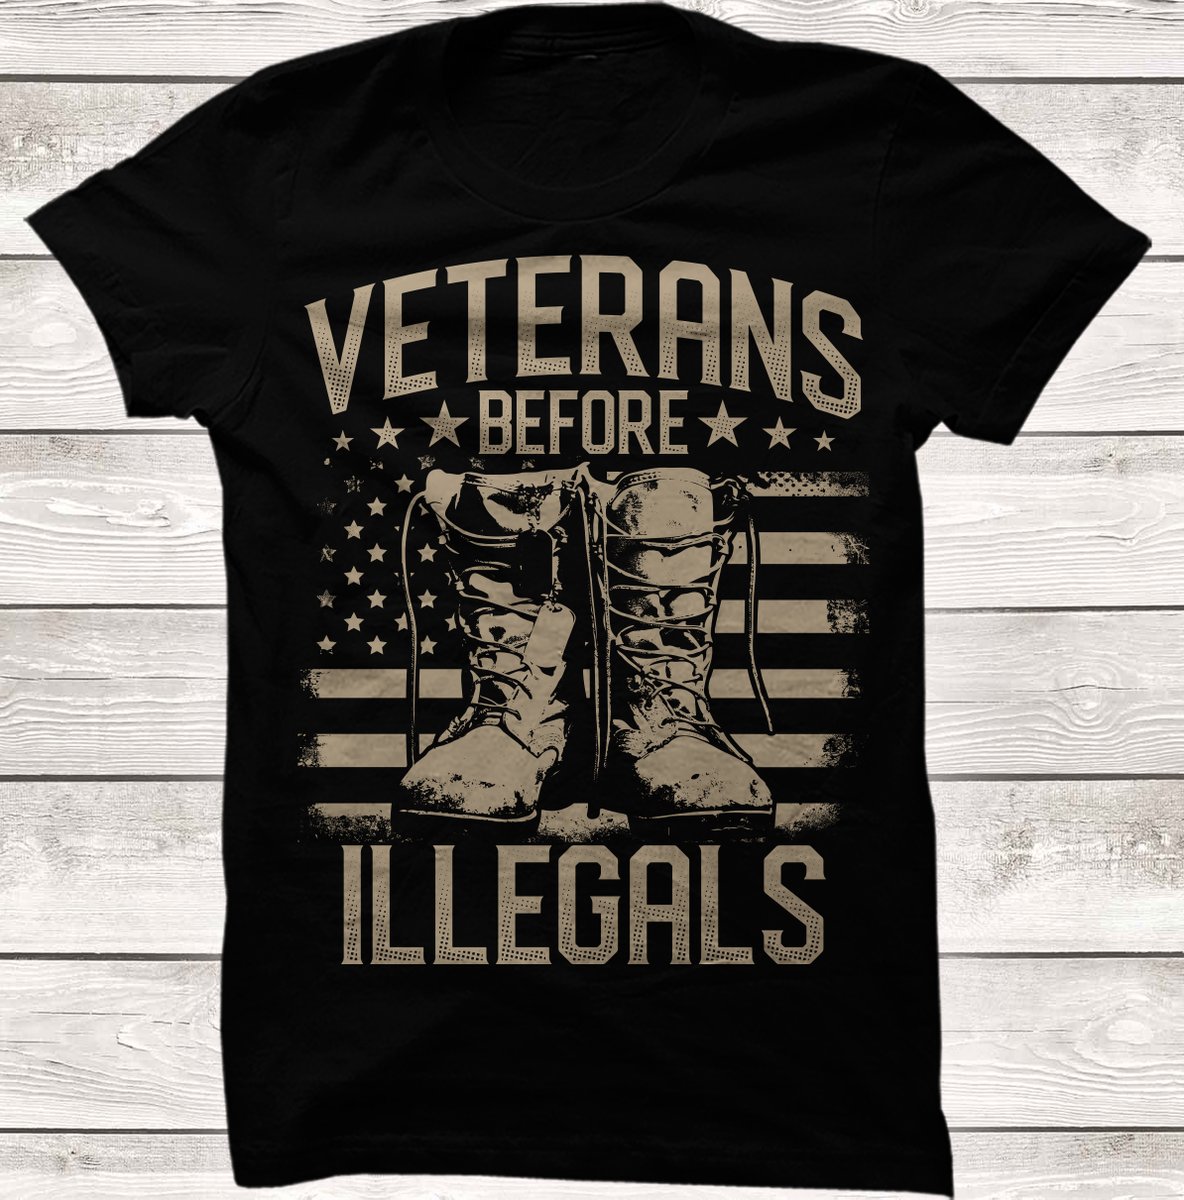 New design to piss off the indecent and support our Veterans! 60% Combed Ring-Spun Cotton, 40% Polyester Collar: Crew Neck Fit Type: Unisex Ships within 3-5 business days From $24.99 grumpygigear.com/.../veterans-b… #GRUMPYGIGEAR #MAGA2024 #Vetsbeforeillegals